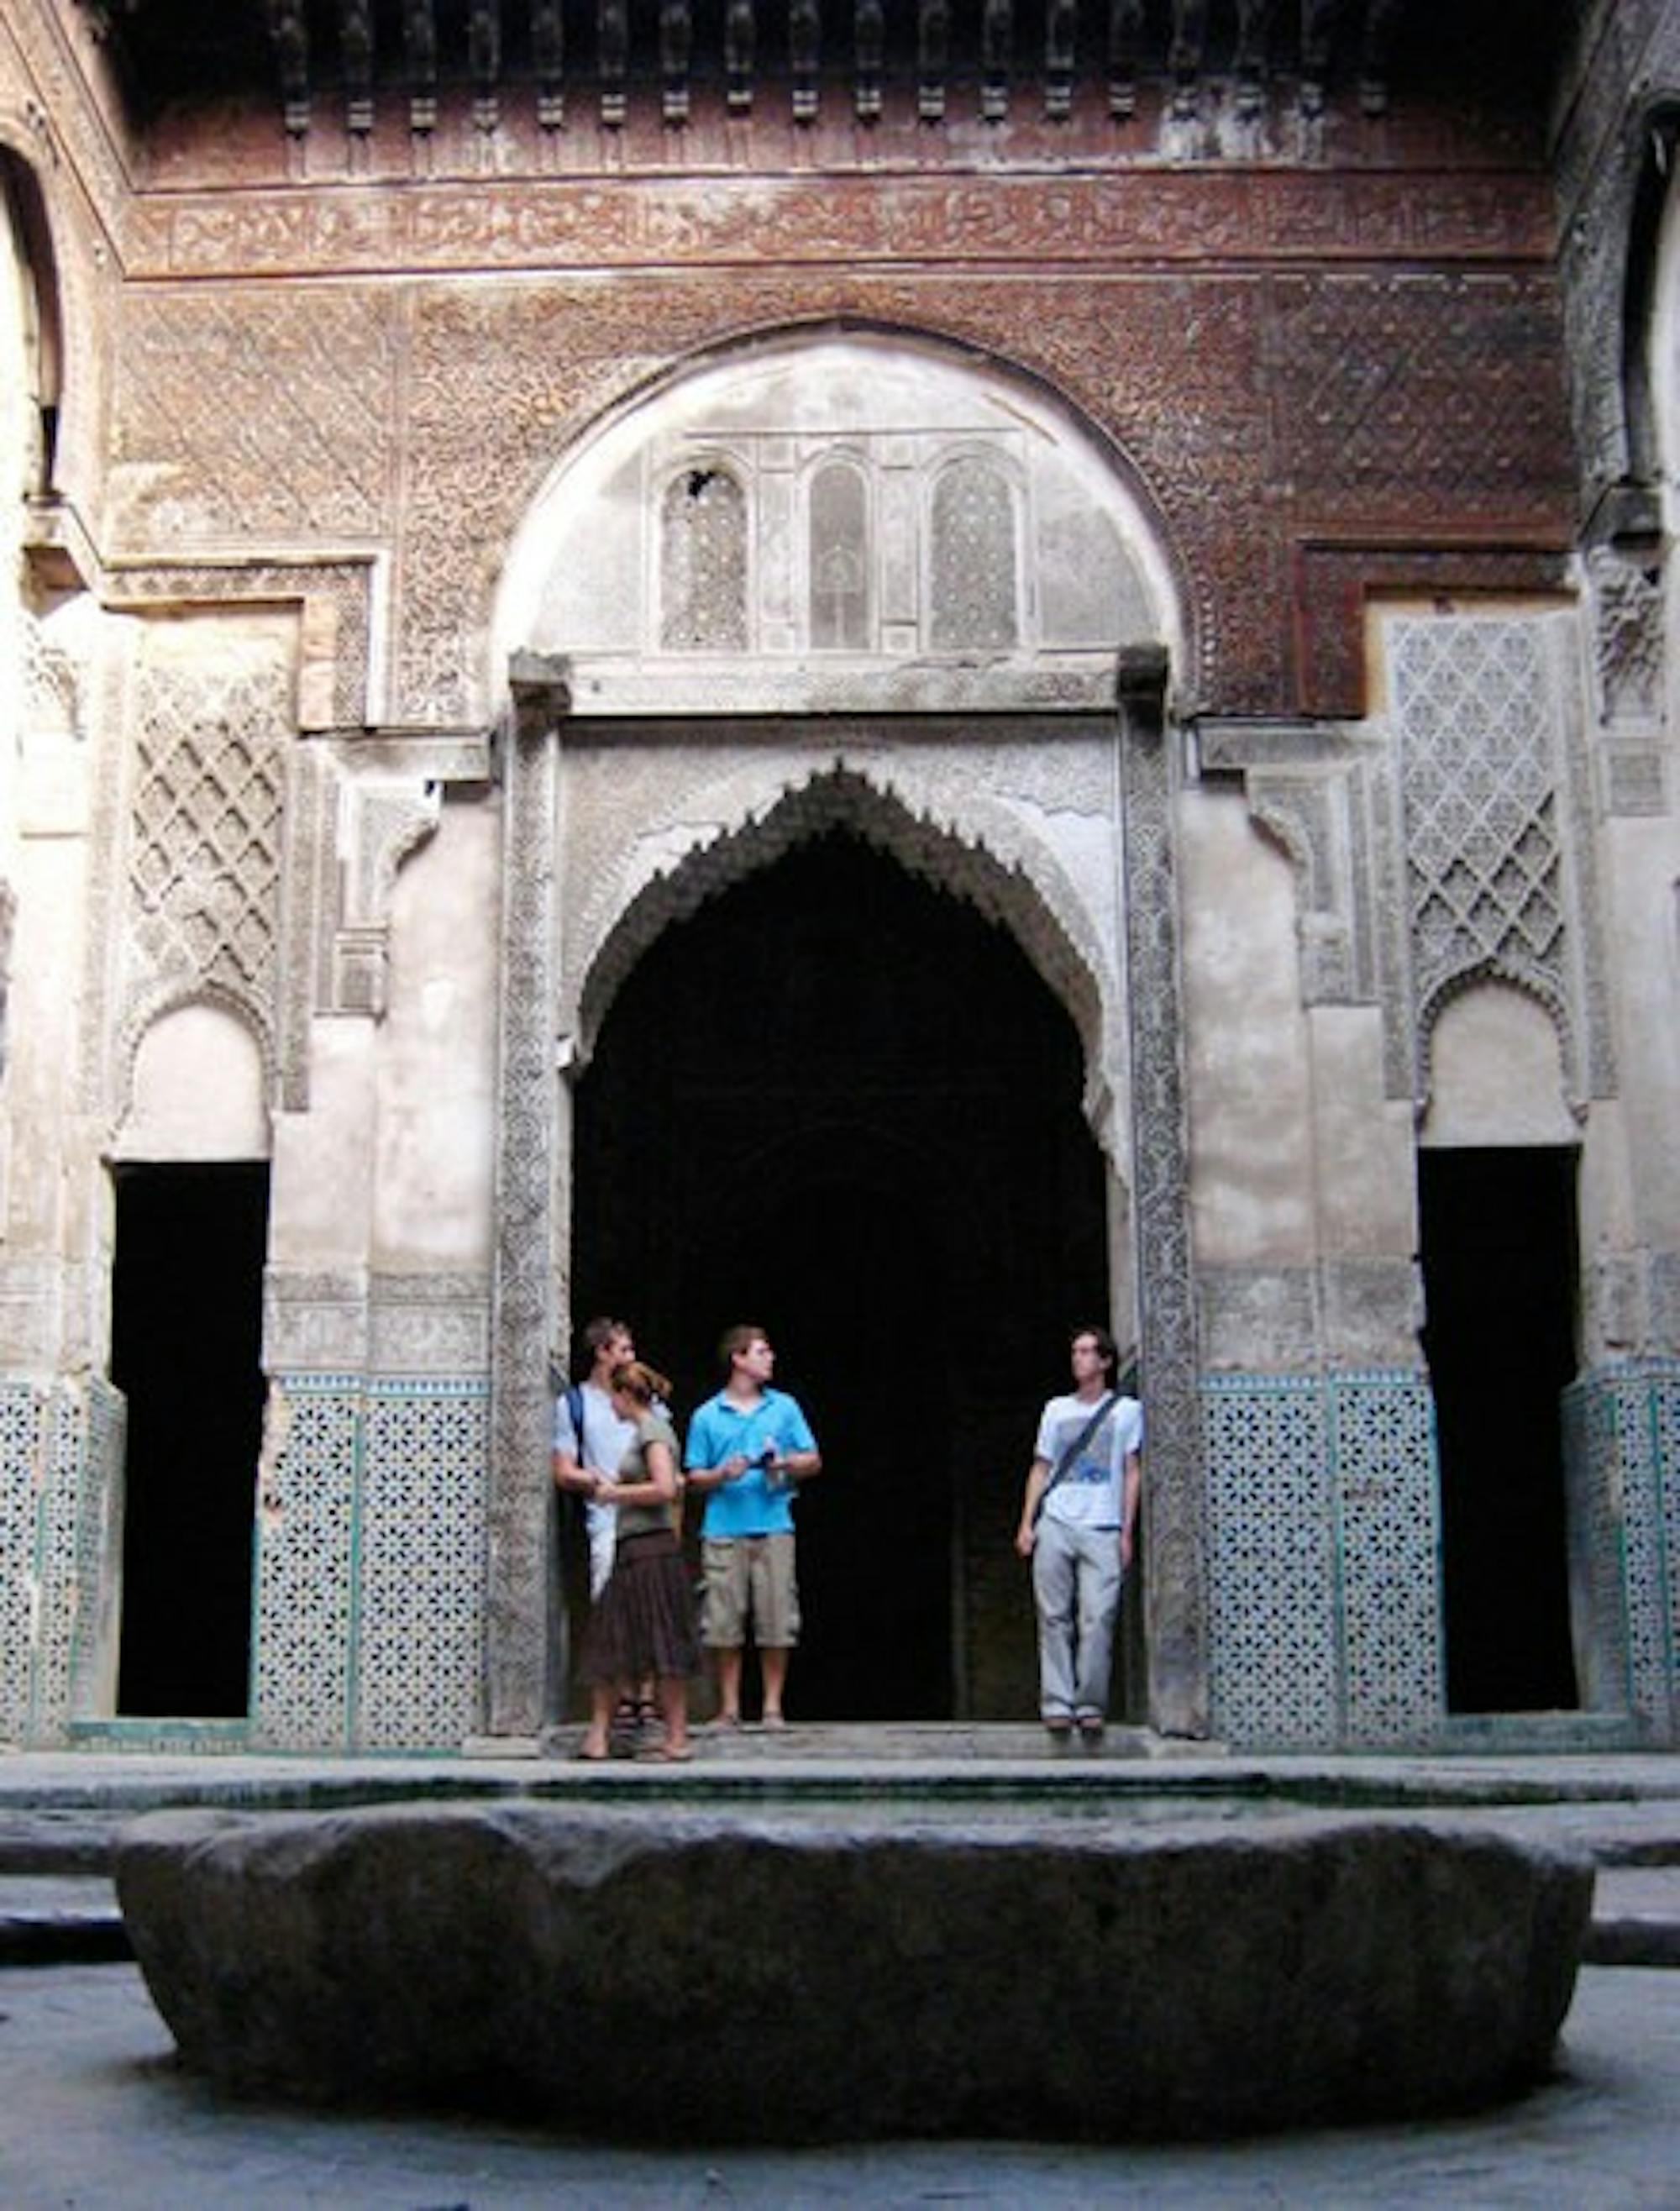 Evan Greulich, Kate Bowman, Phil Aubart and William Blakeley, all members of the Class of 2010, relax in Fez, Morocco, during the summer 2007 Arabic LSA-plus.